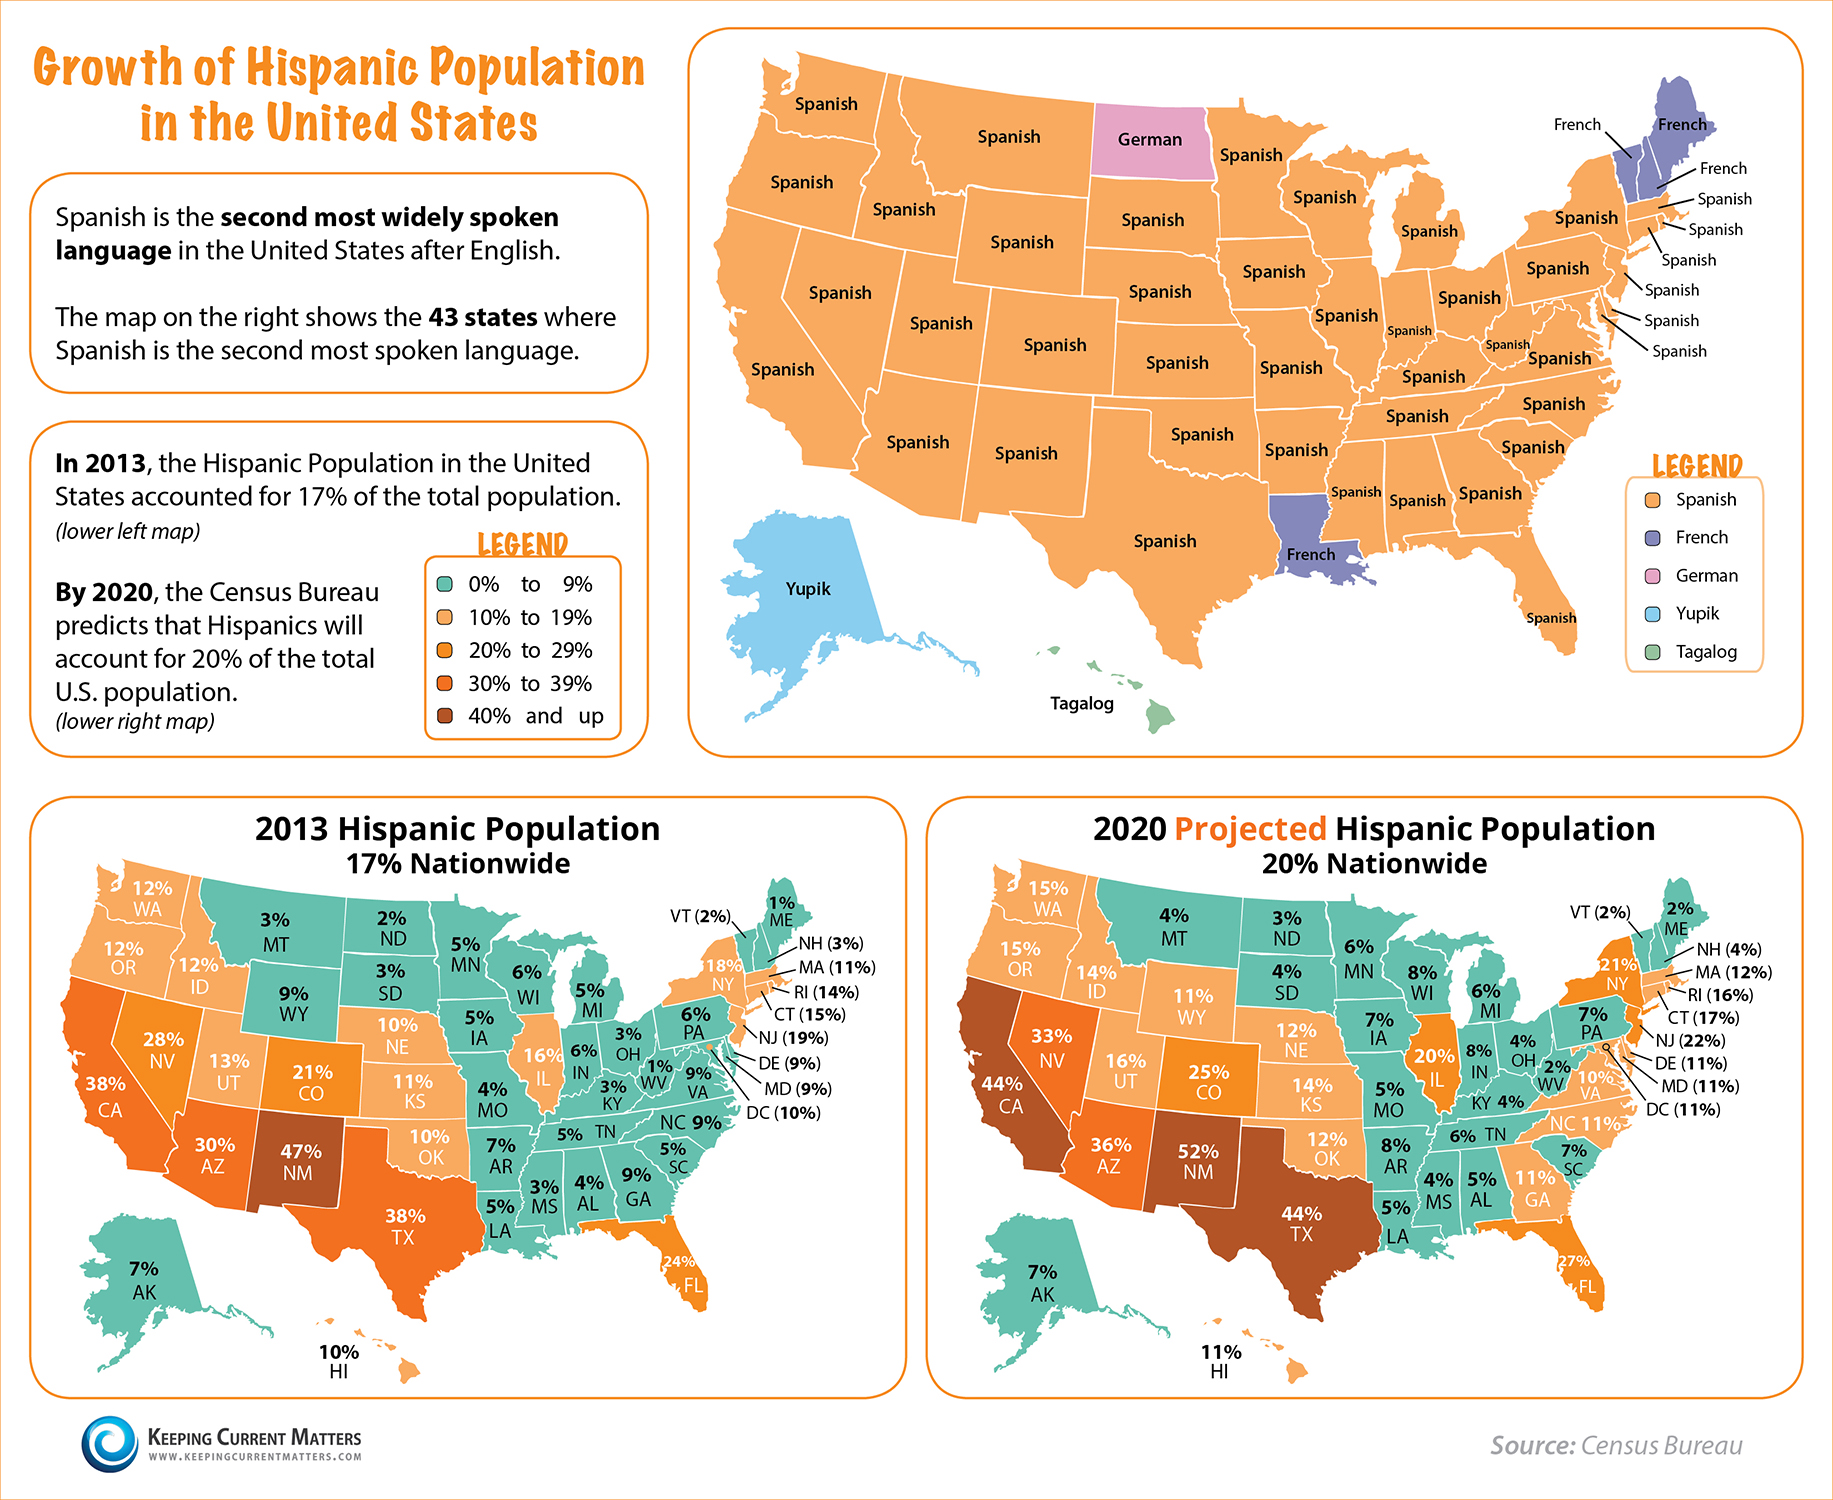 Growth of Hispanic Population in the US | Keeping Current Matters